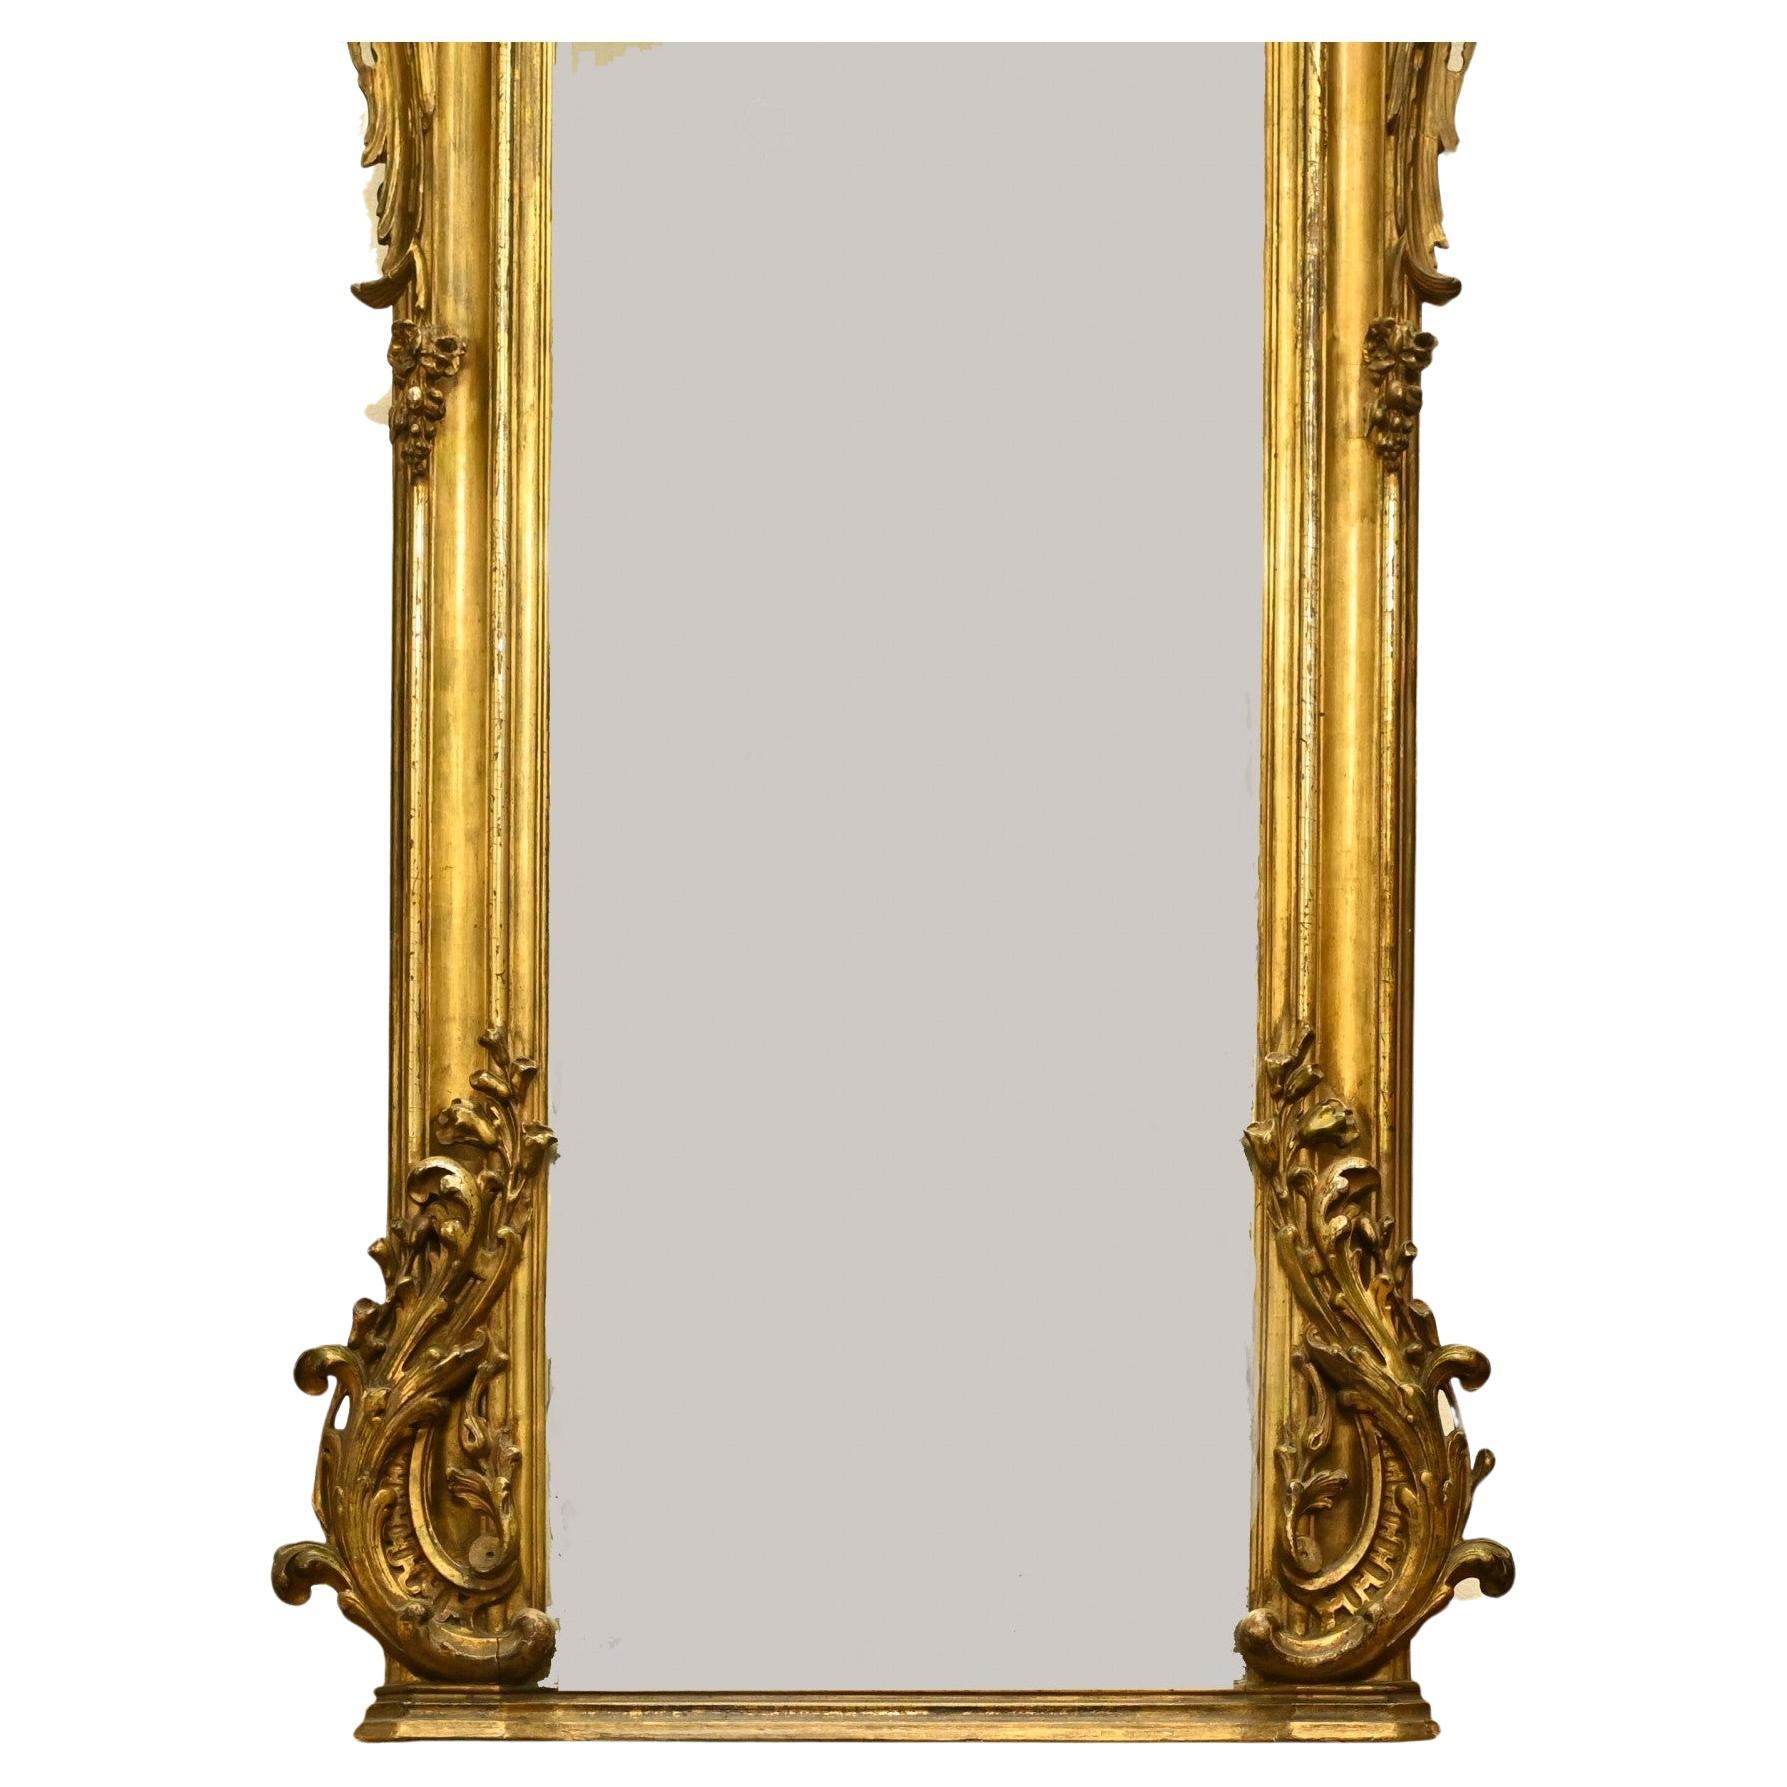 Gorgeous antique French gilt pier mirror
Good size at almost six feet tall - 172 CM
Very ornate frame with decoration to sides and top with rococo cartouche
Glass is clear and blemish free
Bought from a dealer at Marche Biron at Paris antiques